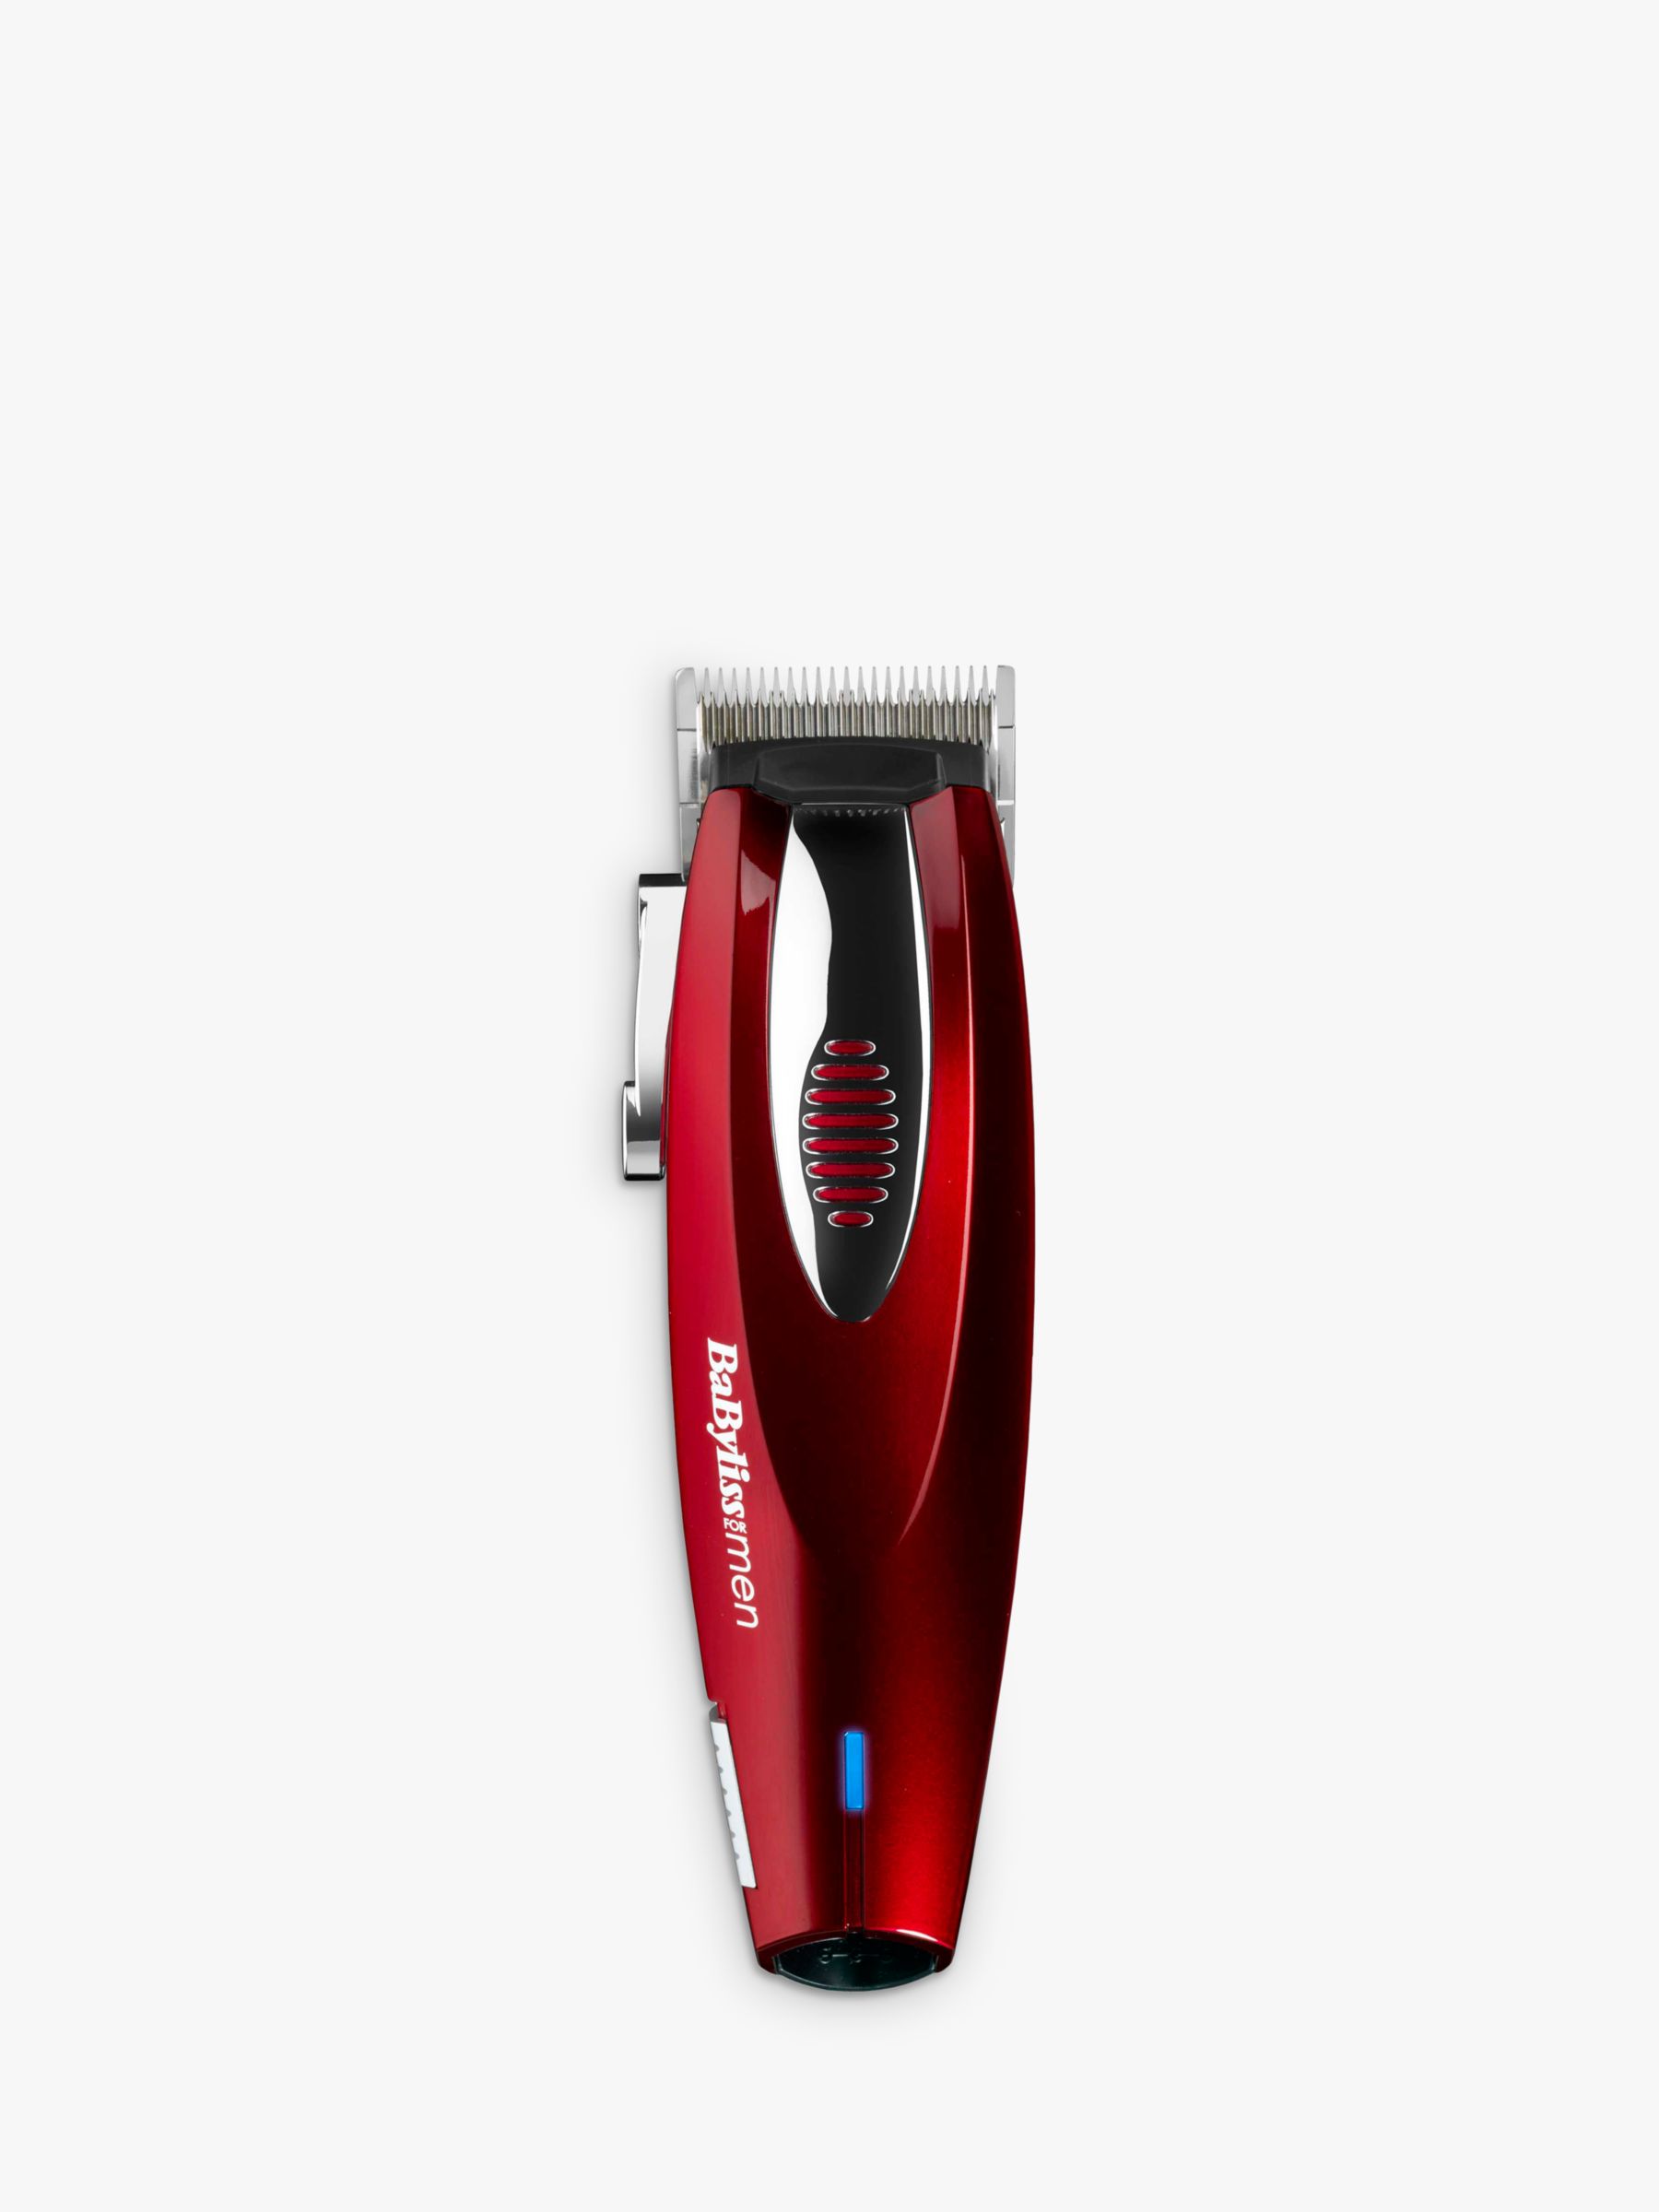 babyliss super clippers